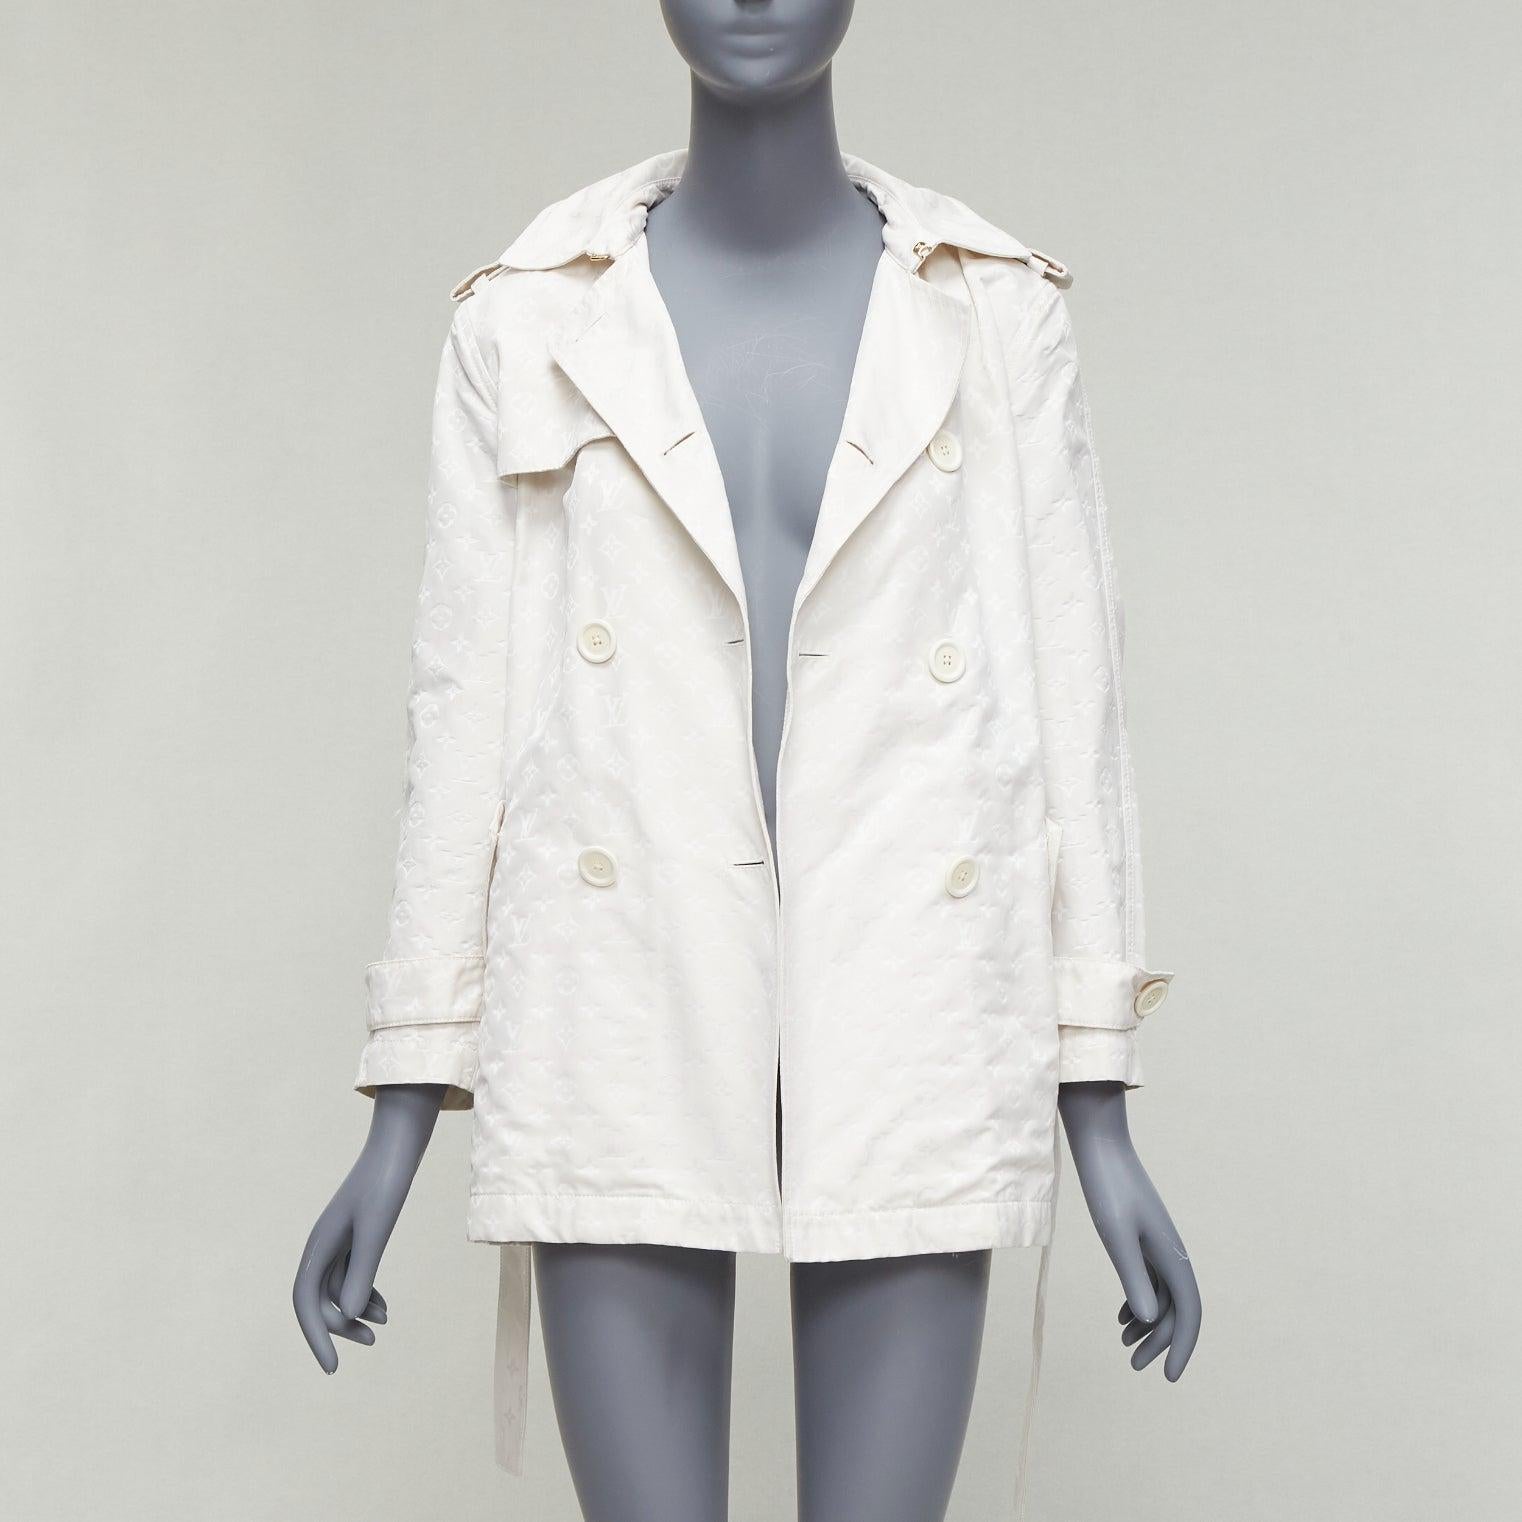 LOUIS VUITTON white LV monogram double breasted belted trench coat FR34 XS
Reference: TGAS/D00897
Brand: Louis Vuitton
Material: Polyester
Color: White
Pattern: Monogram
Closure: Button
Extra Details: Double breasted. Epaulets. Hooded back.
Made in: